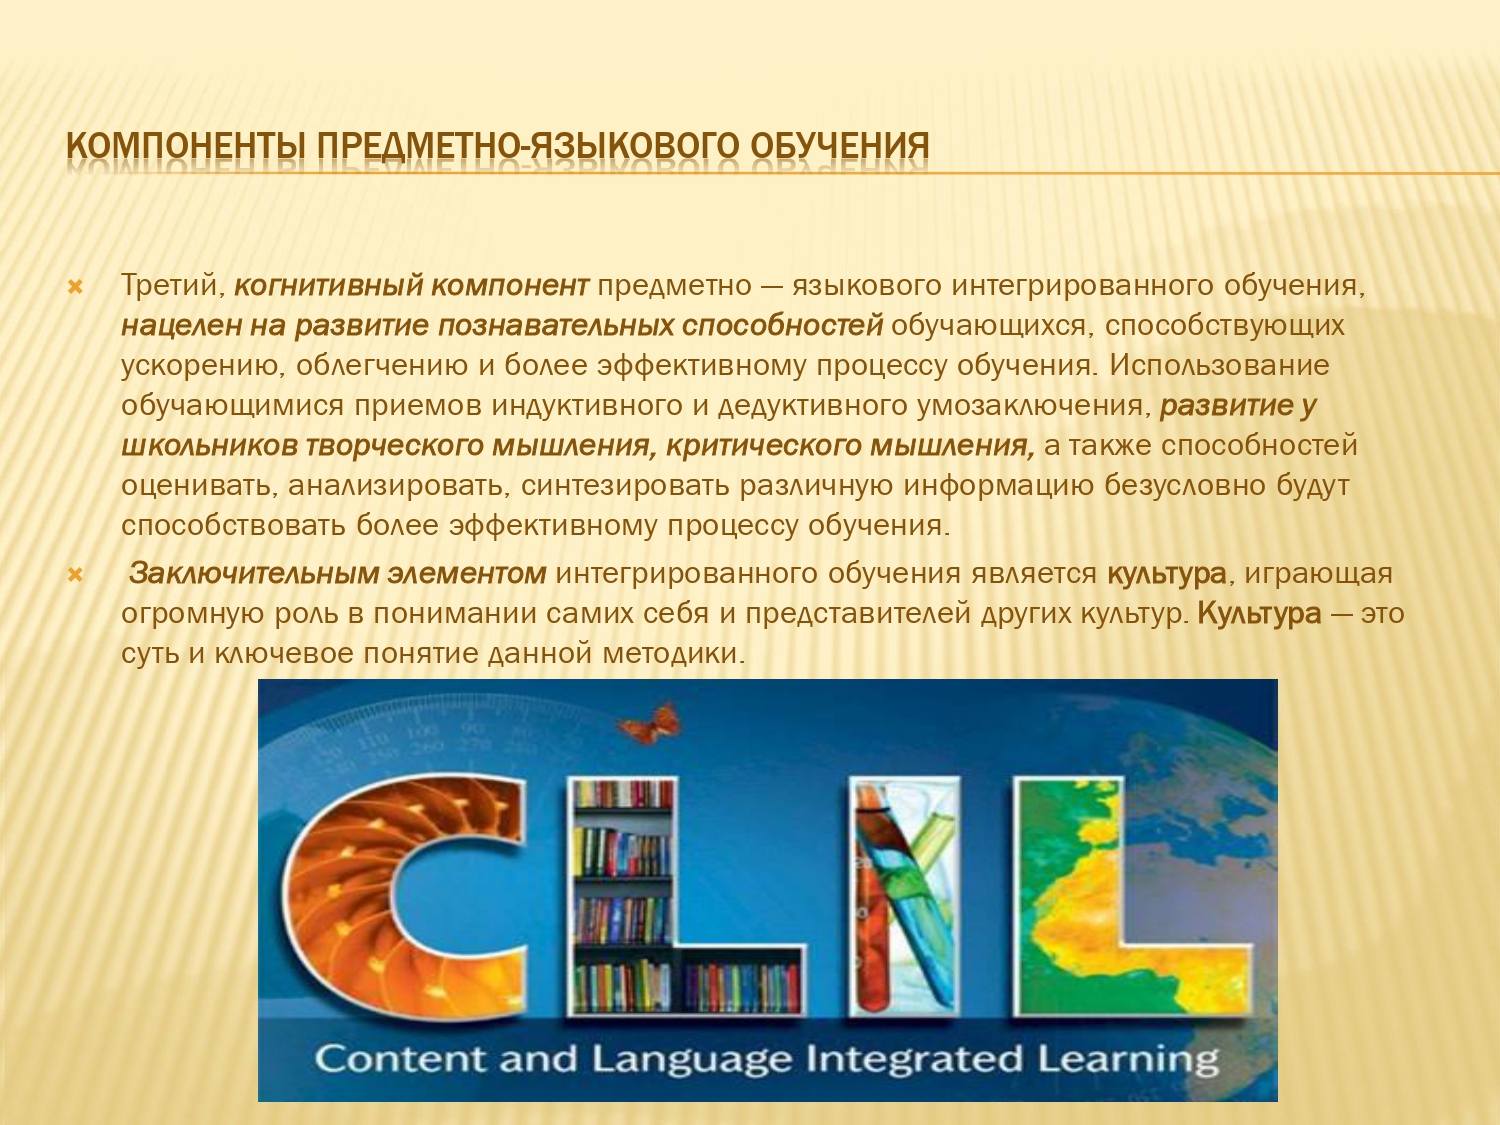 CLIL-презентация_pages-to-jpg-0005